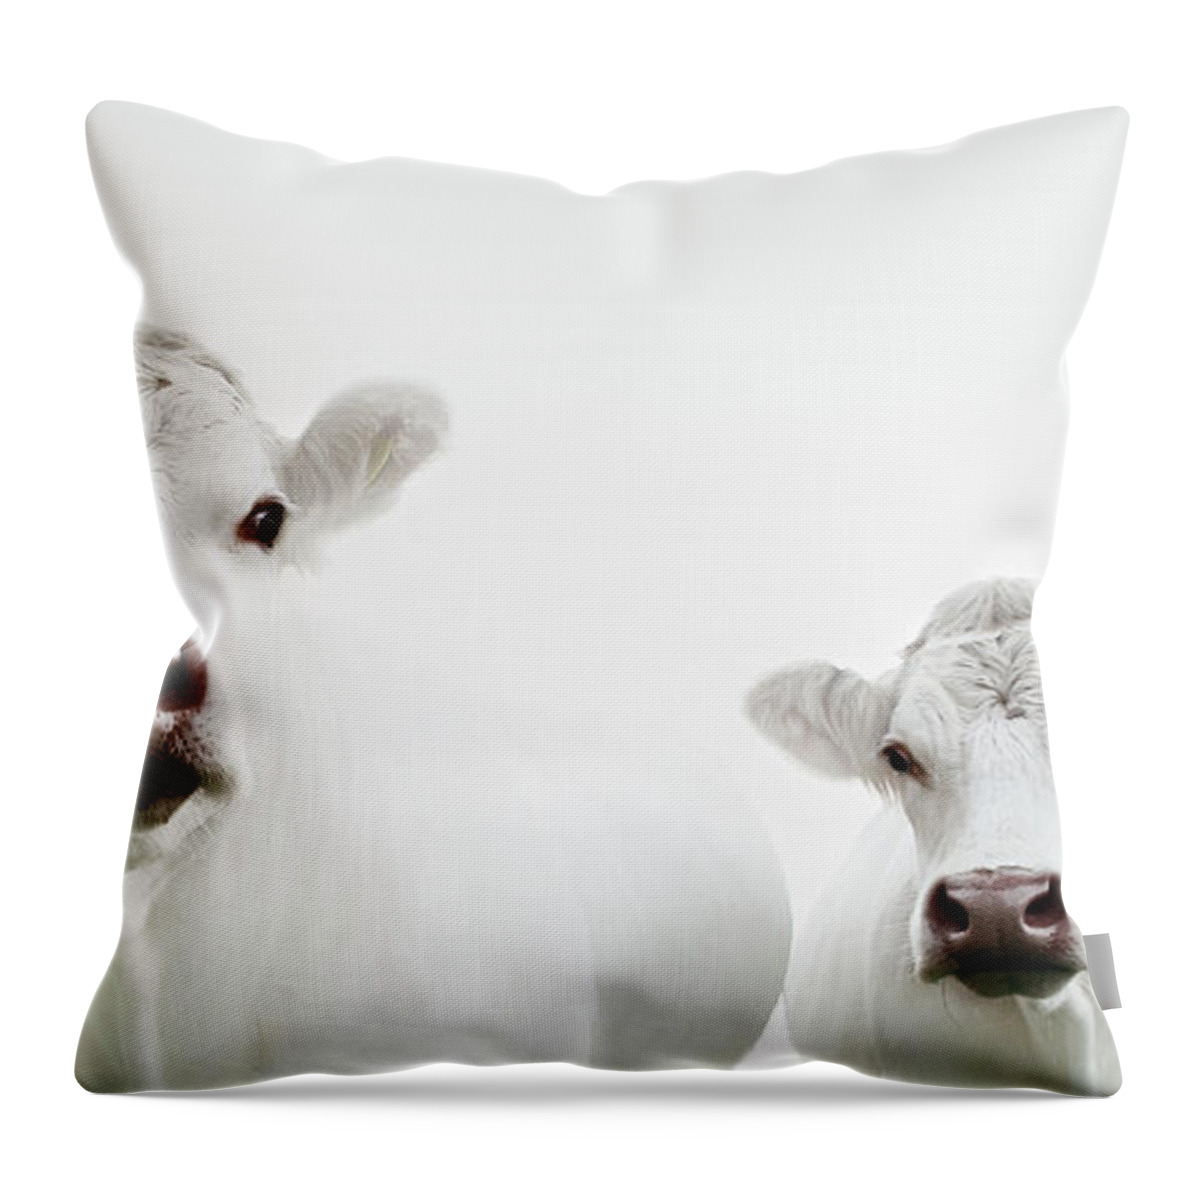 White Background Throw Pillow featuring the photograph Flock Of Cows by Jojo1 Photography